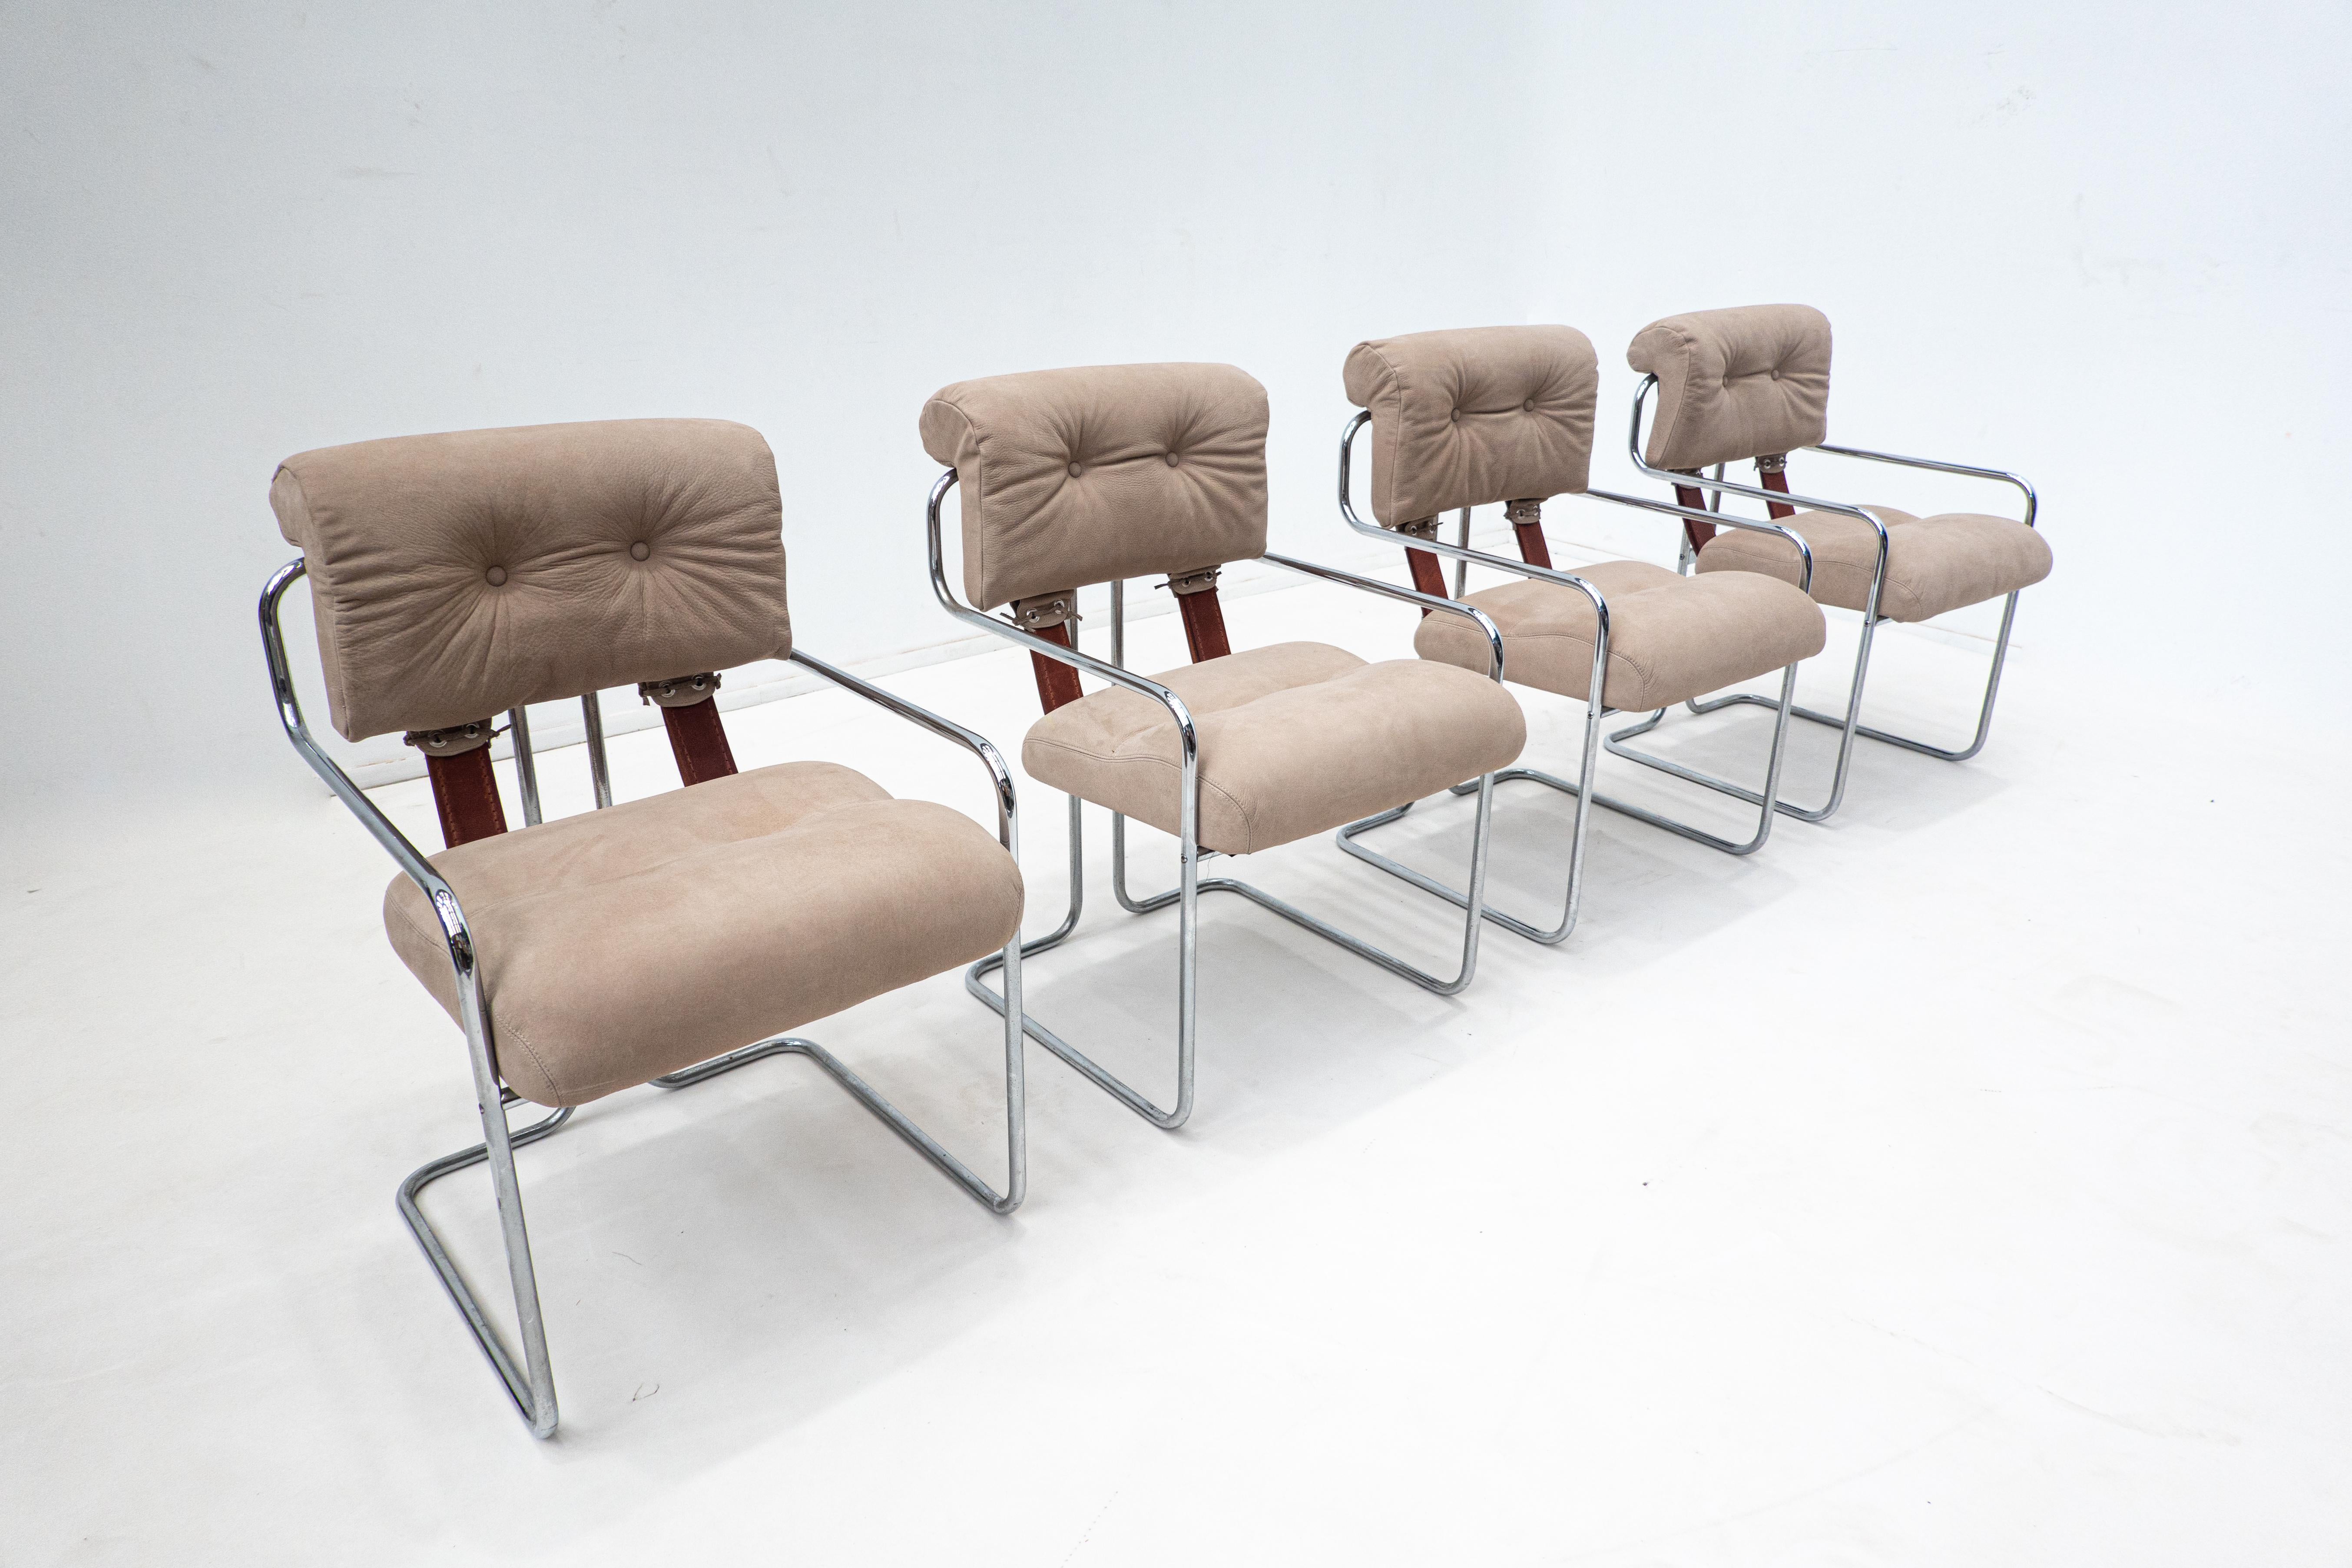 Mid-Century Modern set of 4 Tucroma chairs by Guido Faleschini, leather, 1970s.
New upholstery.